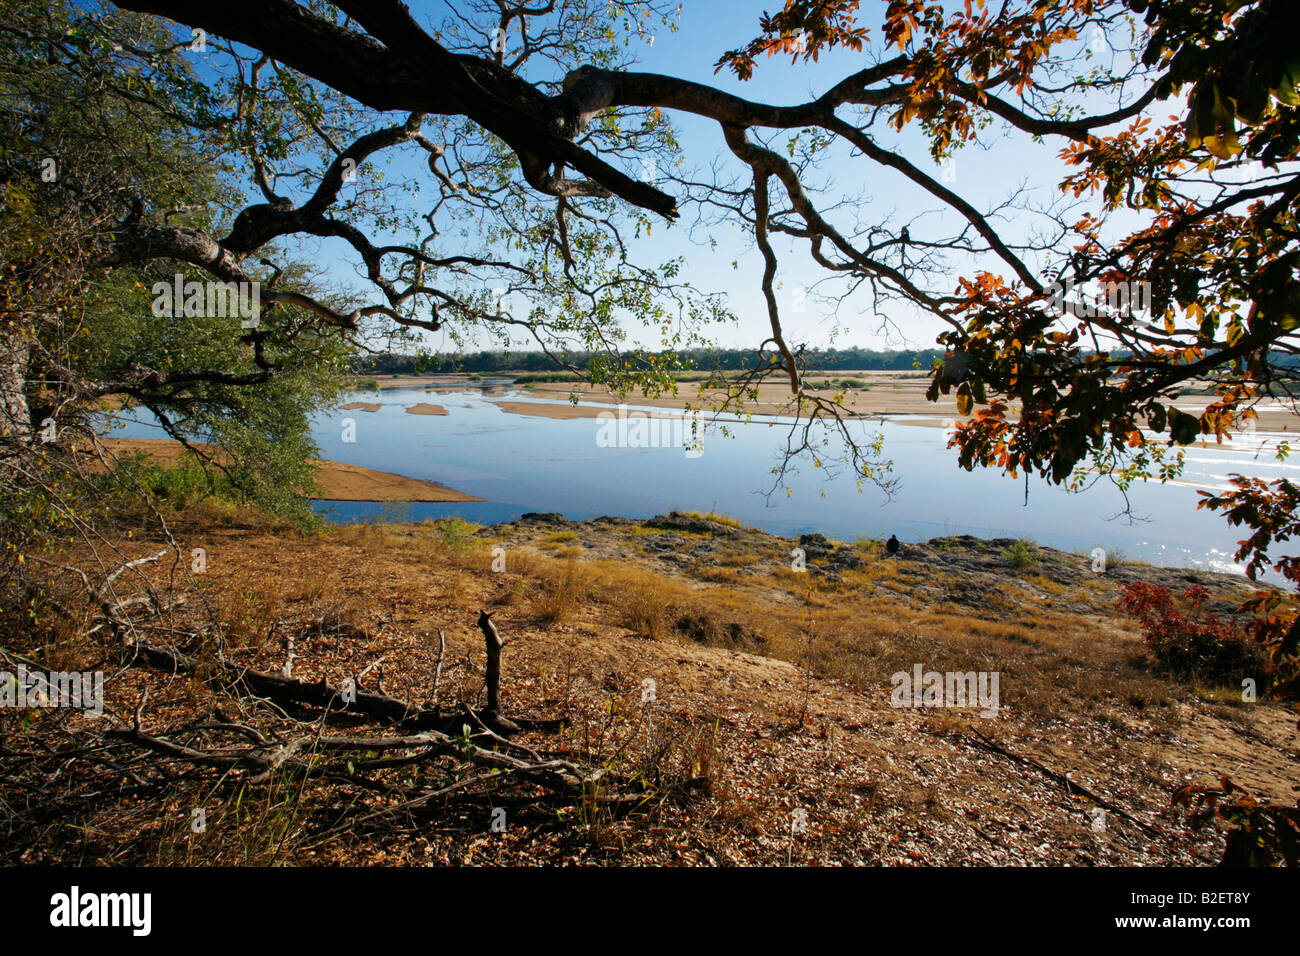 The Save River in central Mozambique viewed from under the trees on the bank. Stock Photo